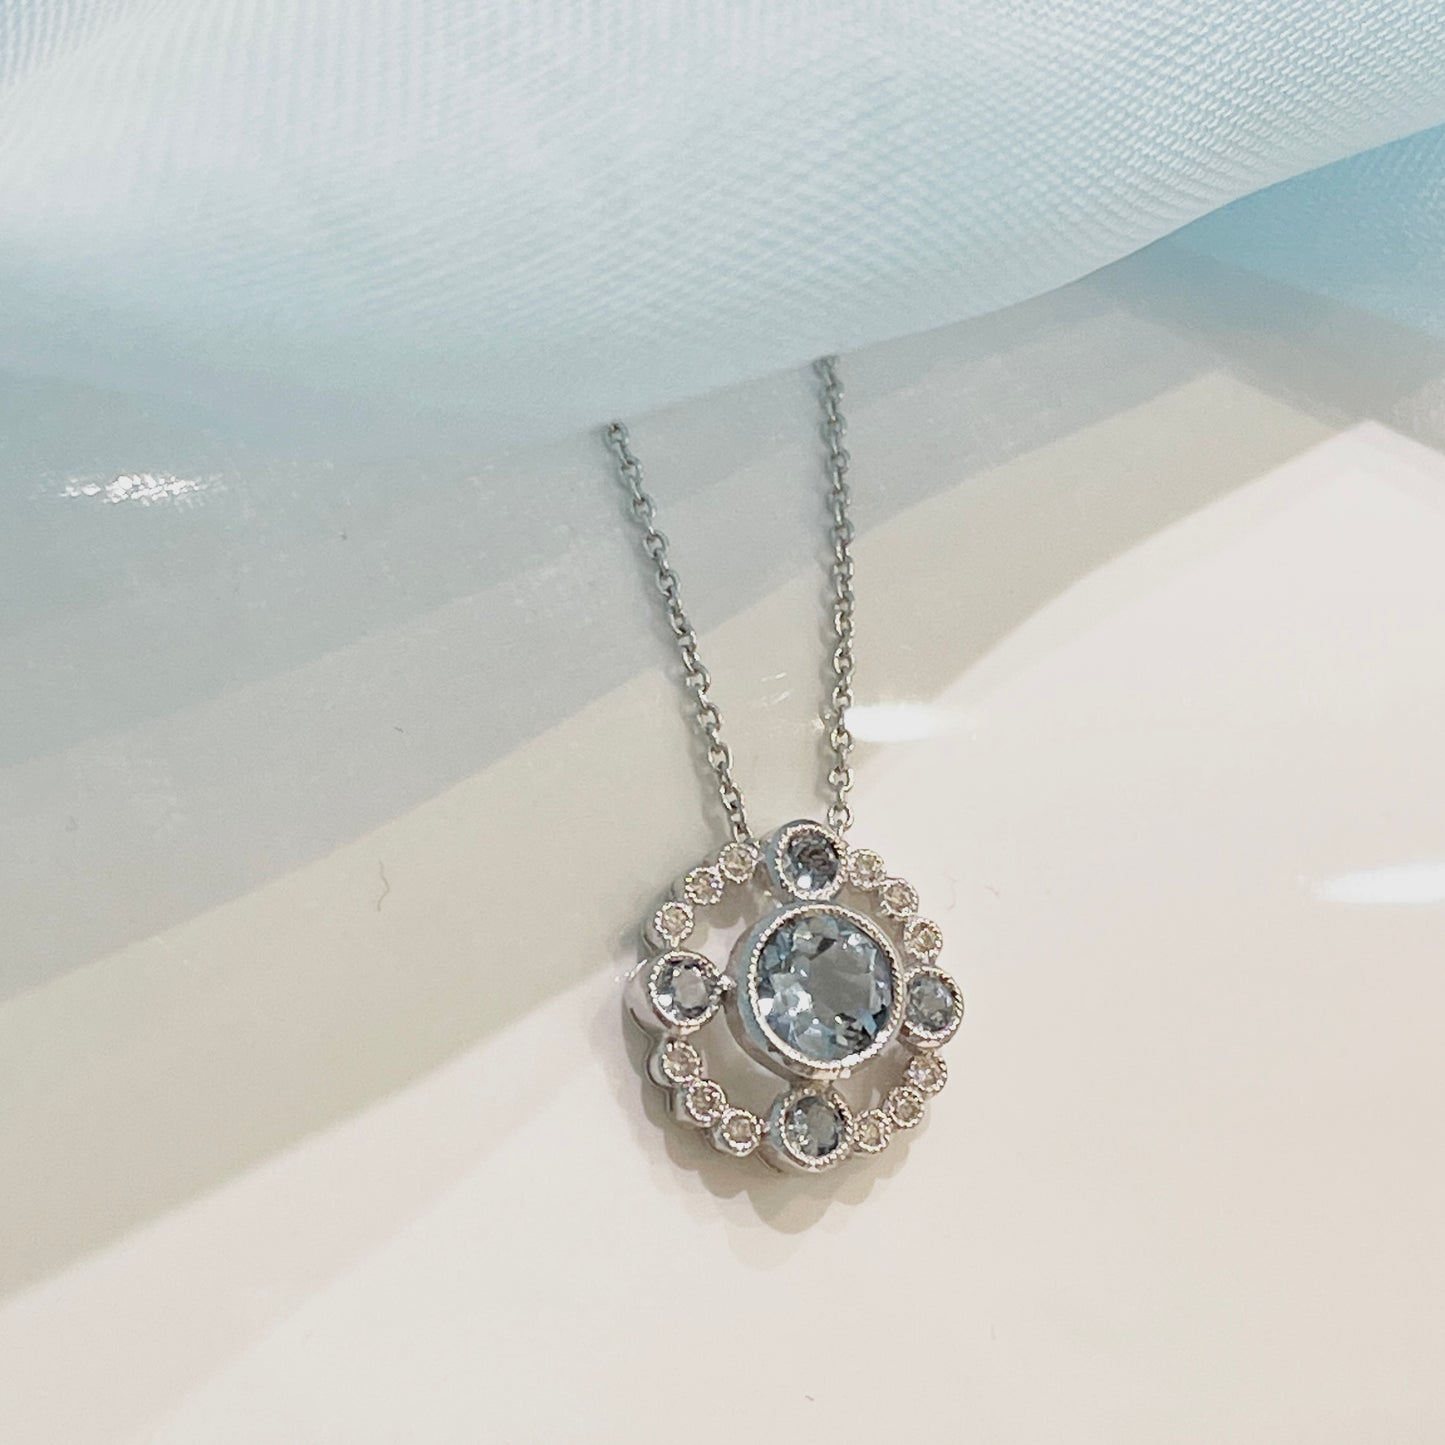 Real aquamarine necklace and diamond white gold round cluster pendant